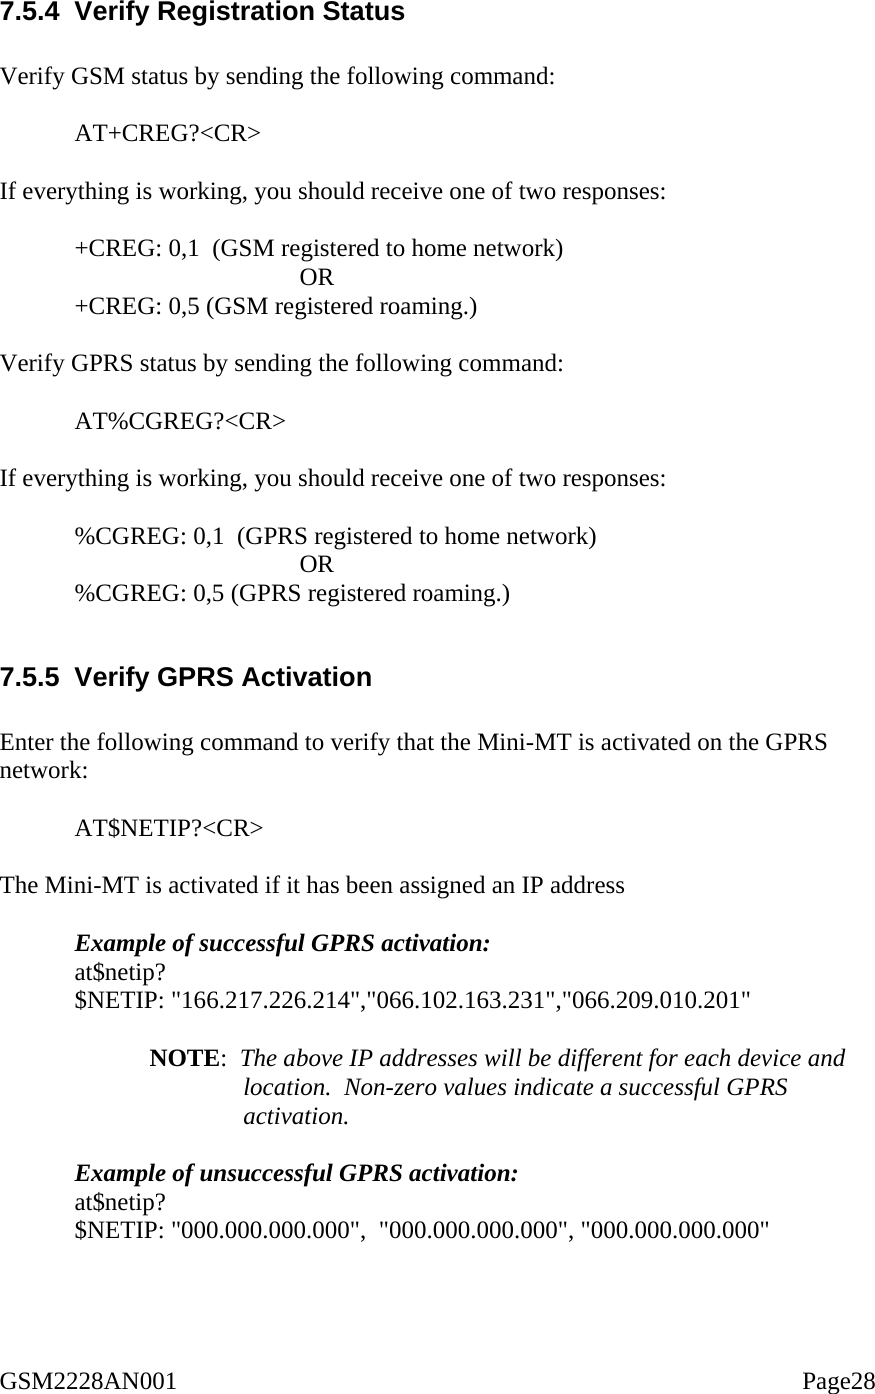  7.5.4  Verify Registration Status  Verify GSM status by sending the following command:   AT+CREG?&lt;CR&gt;   If everything is working, you should receive one of two responses:   +CREG: 0,1  (GSM registered to home network)  OR  +CREG: 0,5 (GSM registered roaming.)  Verify GPRS status by sending the following command:   AT%CGREG?&lt;CR&gt;  If everything is working, you should receive one of two responses:   %CGREG: 0,1  (GPRS registered to home network)  OR %CGREG: 0,5 (GPRS registered roaming.)  7.5.5  Verify GPRS Activation  Enter the following command to verify that the Mini-MT is activated on the GPRS network:  AT$NETIP?&lt;CR&gt;  The Mini-MT is activated if it has been assigned an IP address  Example of successful GPRS activation: at$netip? $NETIP: &quot;166.217.226.214&quot;,&quot;066.102.163.231&quot;,&quot;066.209.010.201&quot;  NOTE:  The above IP addresses will be different for each device and location.  Non-zero values indicate a successful GPRS activation.  Example of unsuccessful GPRS activation: at$netip? $NETIP: &quot;000.000.000.000&quot;,  &quot;000.000.000.000&quot;, &quot;000.000.000.000&quot;  GSM2228AN001                                                                                                    Page28 